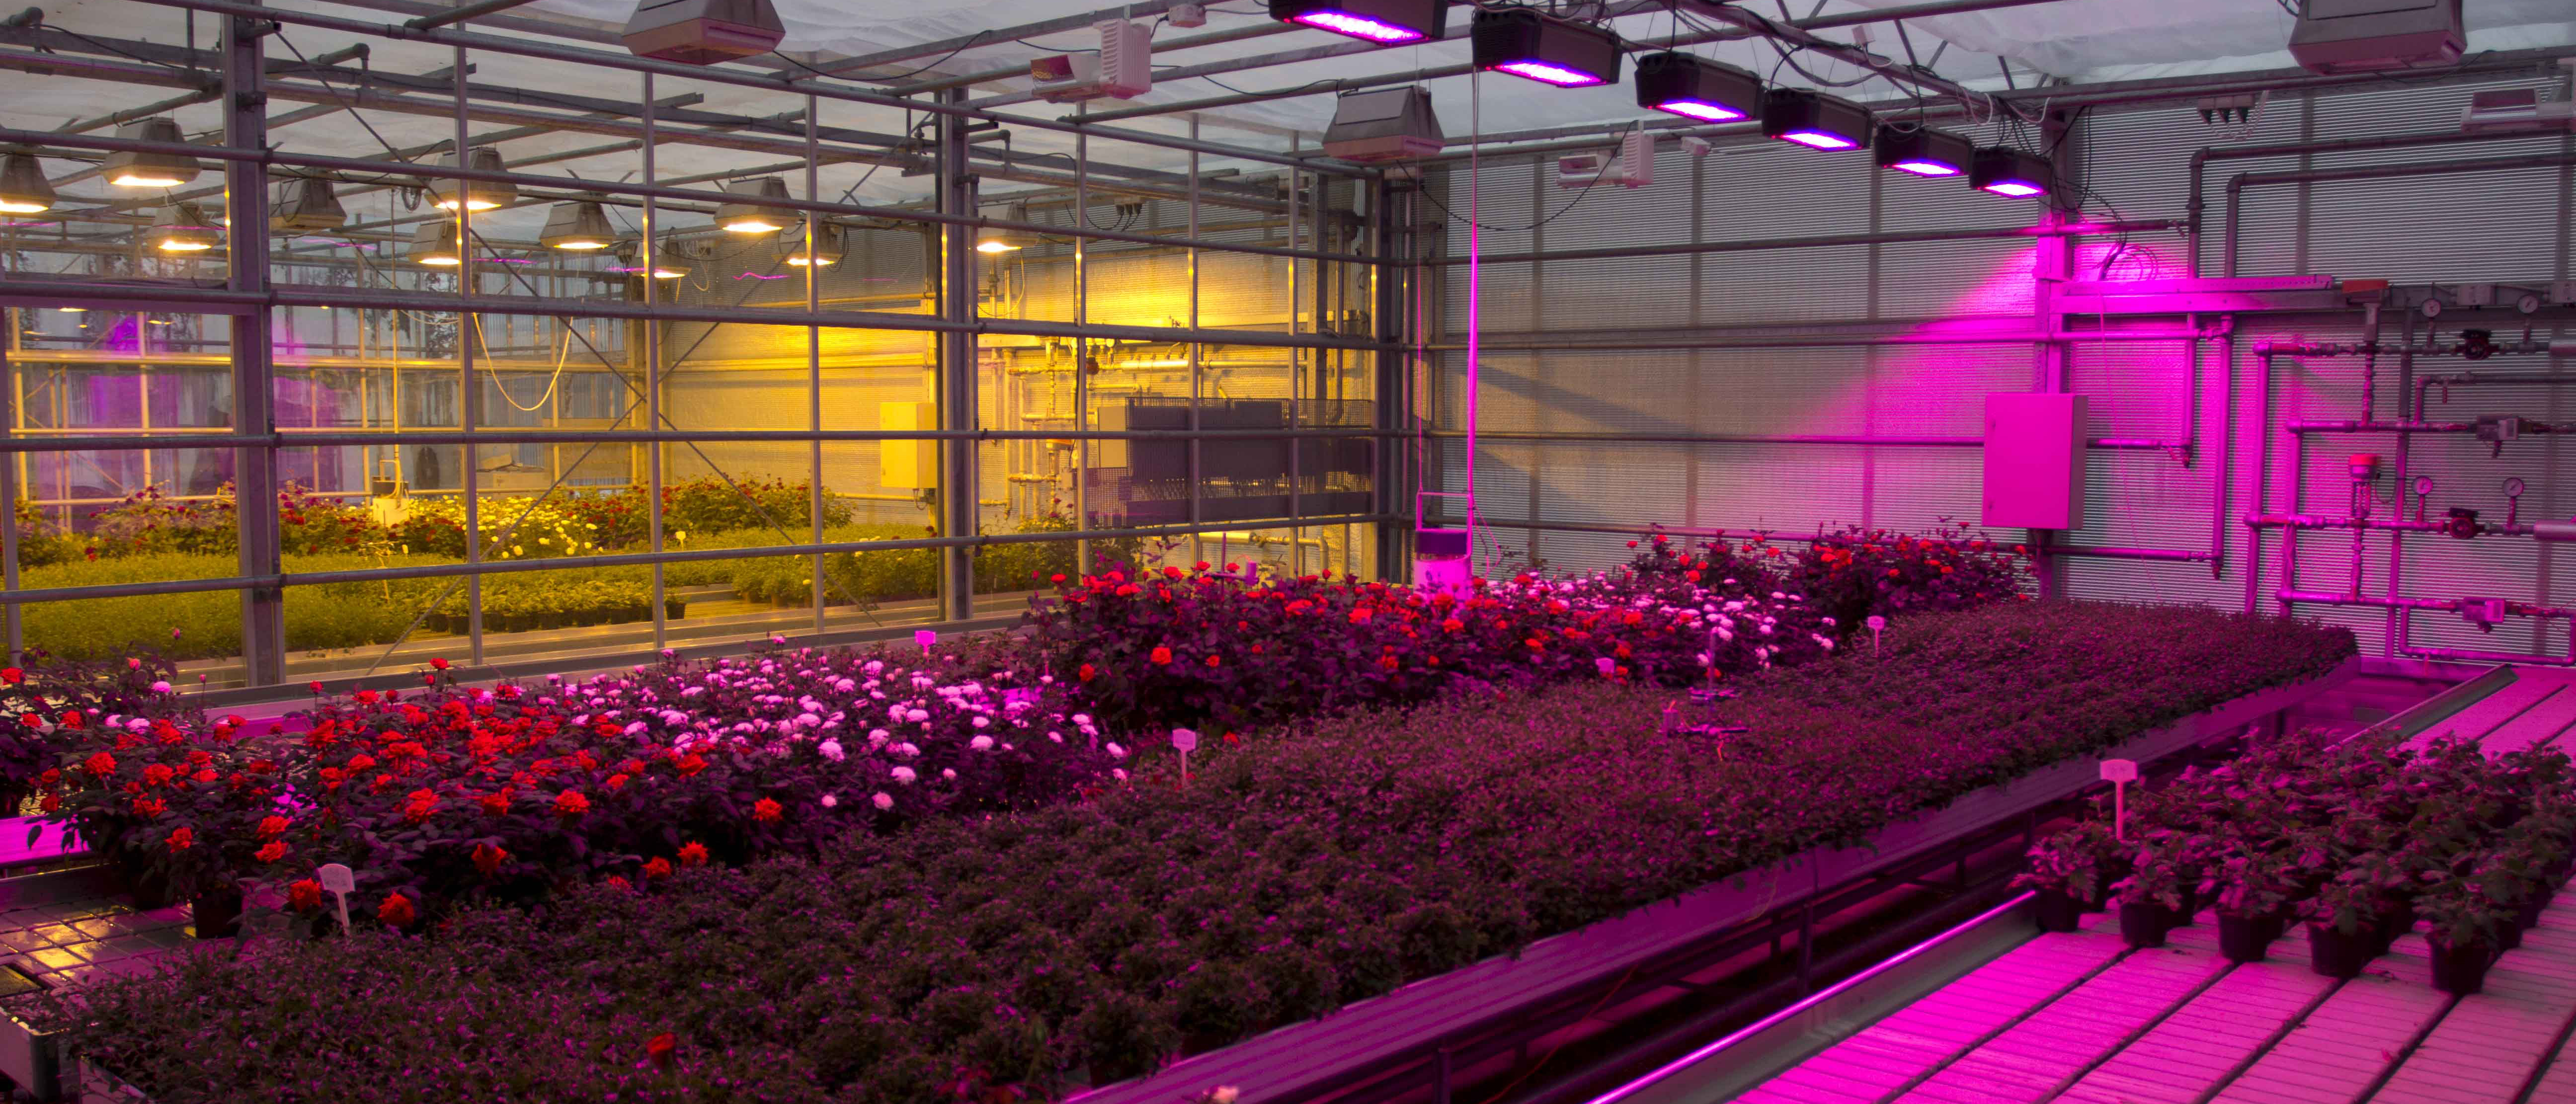 Smart Grid Ready Energy Cost Efficient Lighting System for Green House Horticulture